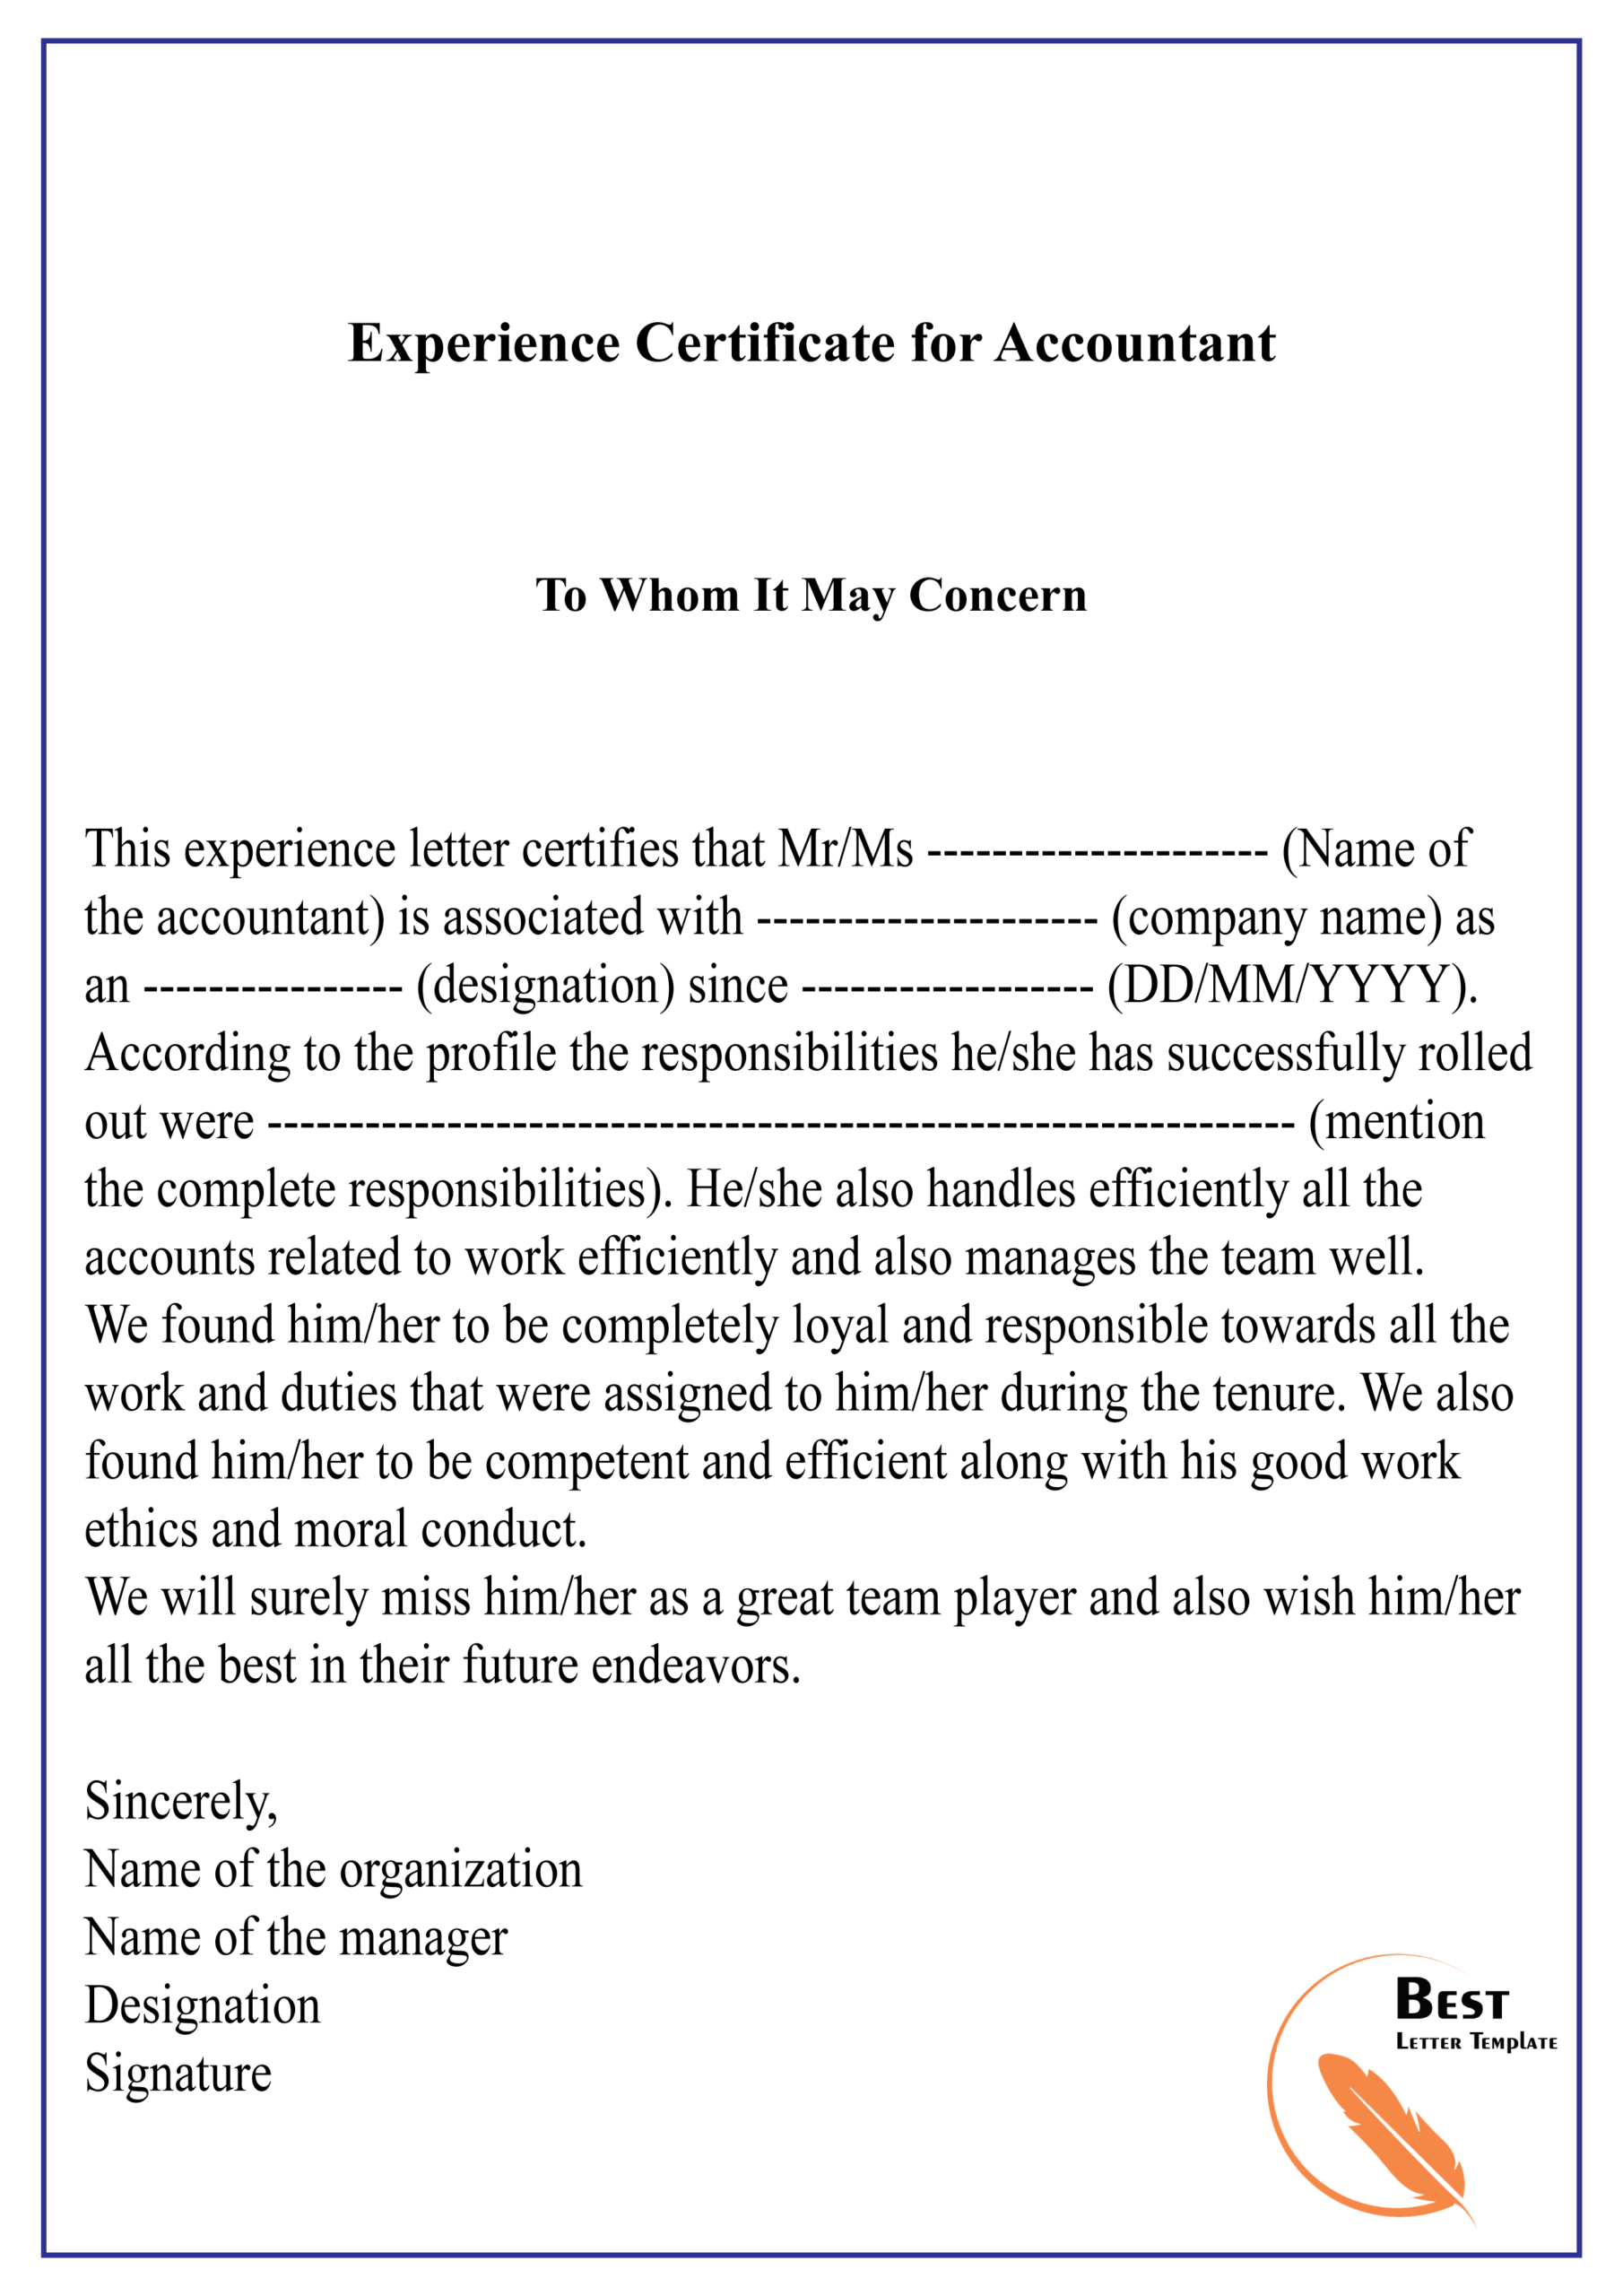 Experience Certificate For Accountant 01 | Best Letter Template Throughout Certificate Of Experience Template